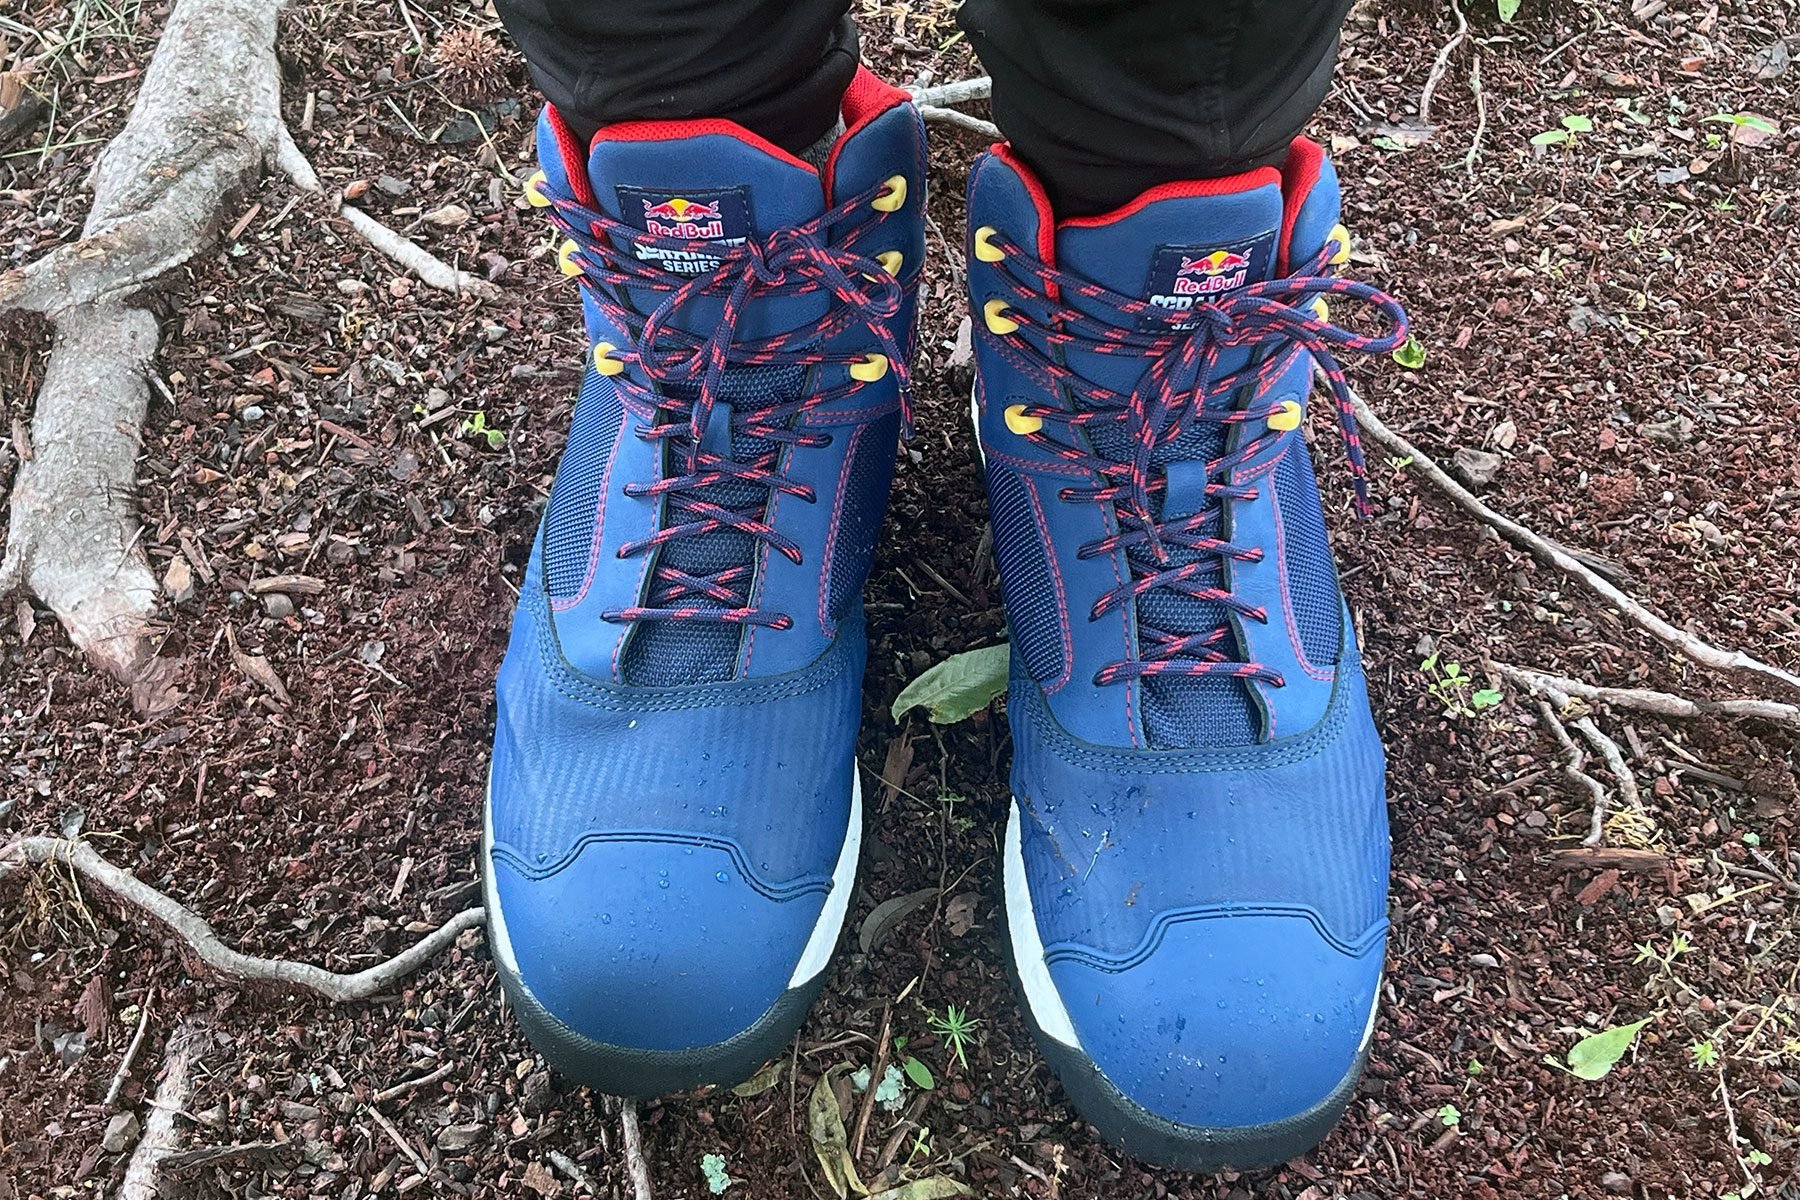 Wolverine Hiking Boots Get a Red Bull-Themed Makeover